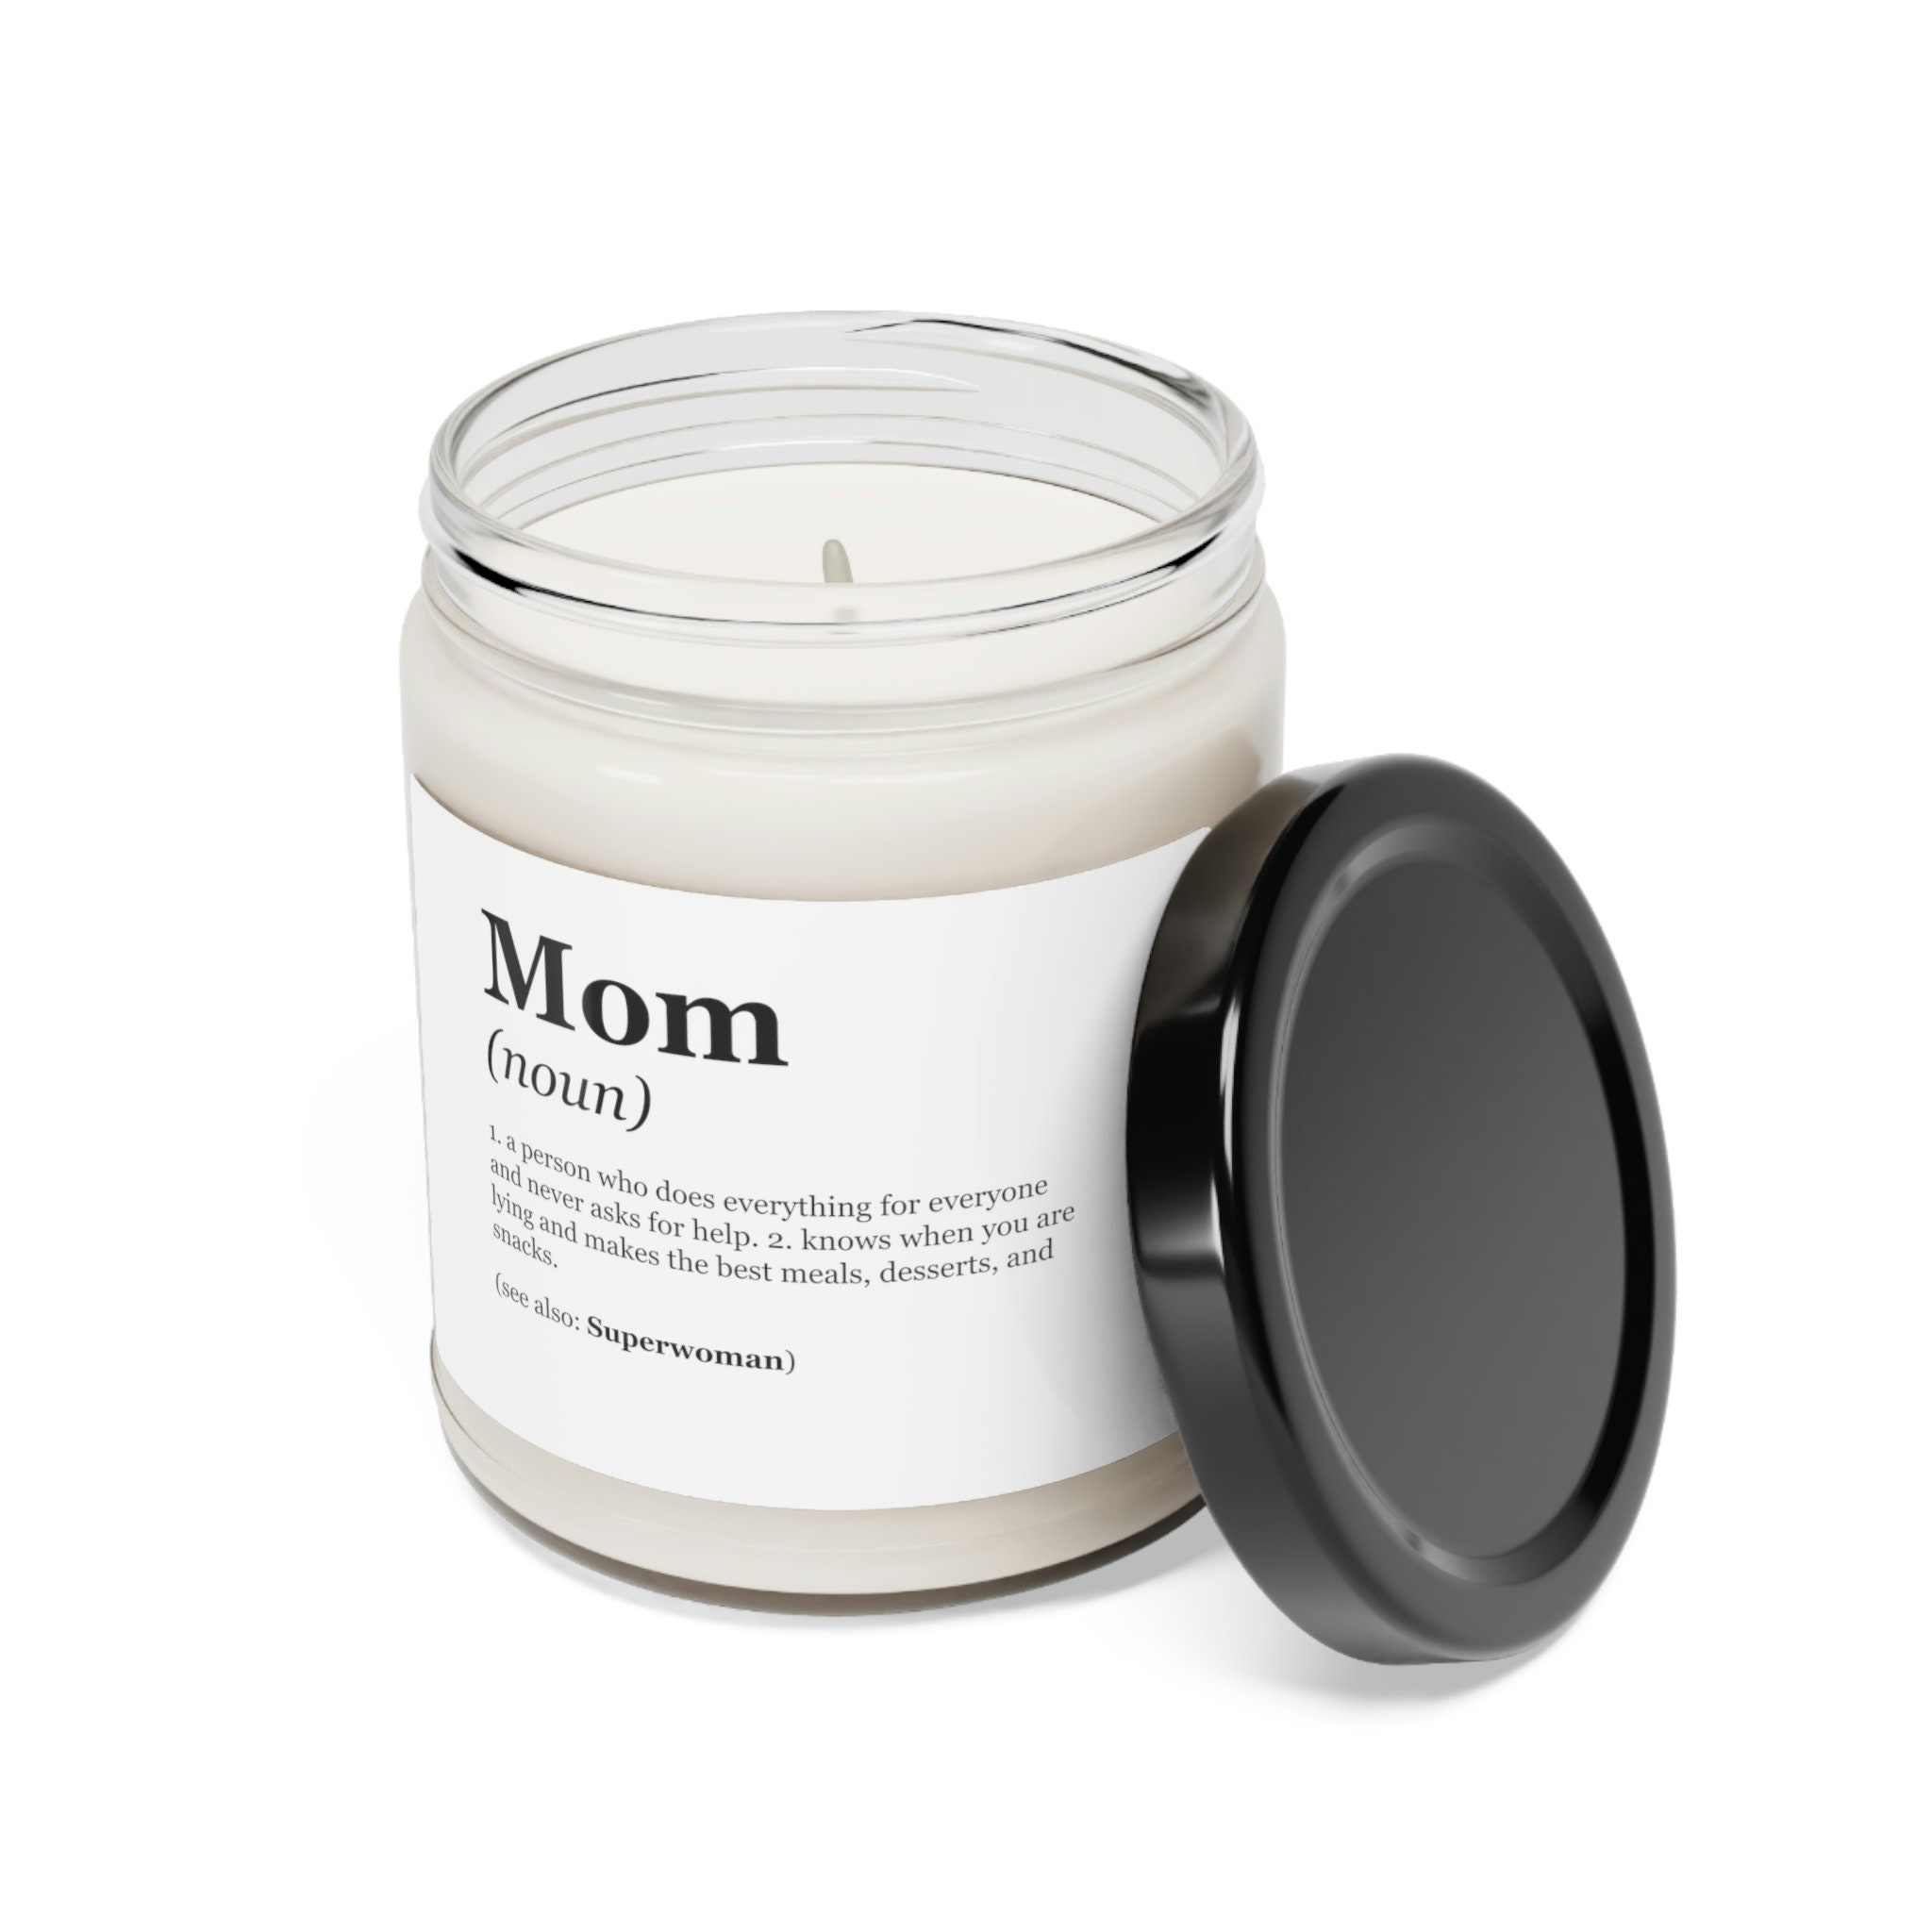 Discover Mom Definition Scented Soy Candle, 9oz, Mother's Day Gift, Birthday Gift, Friend Gift, Pregnancy/Baby Announcement